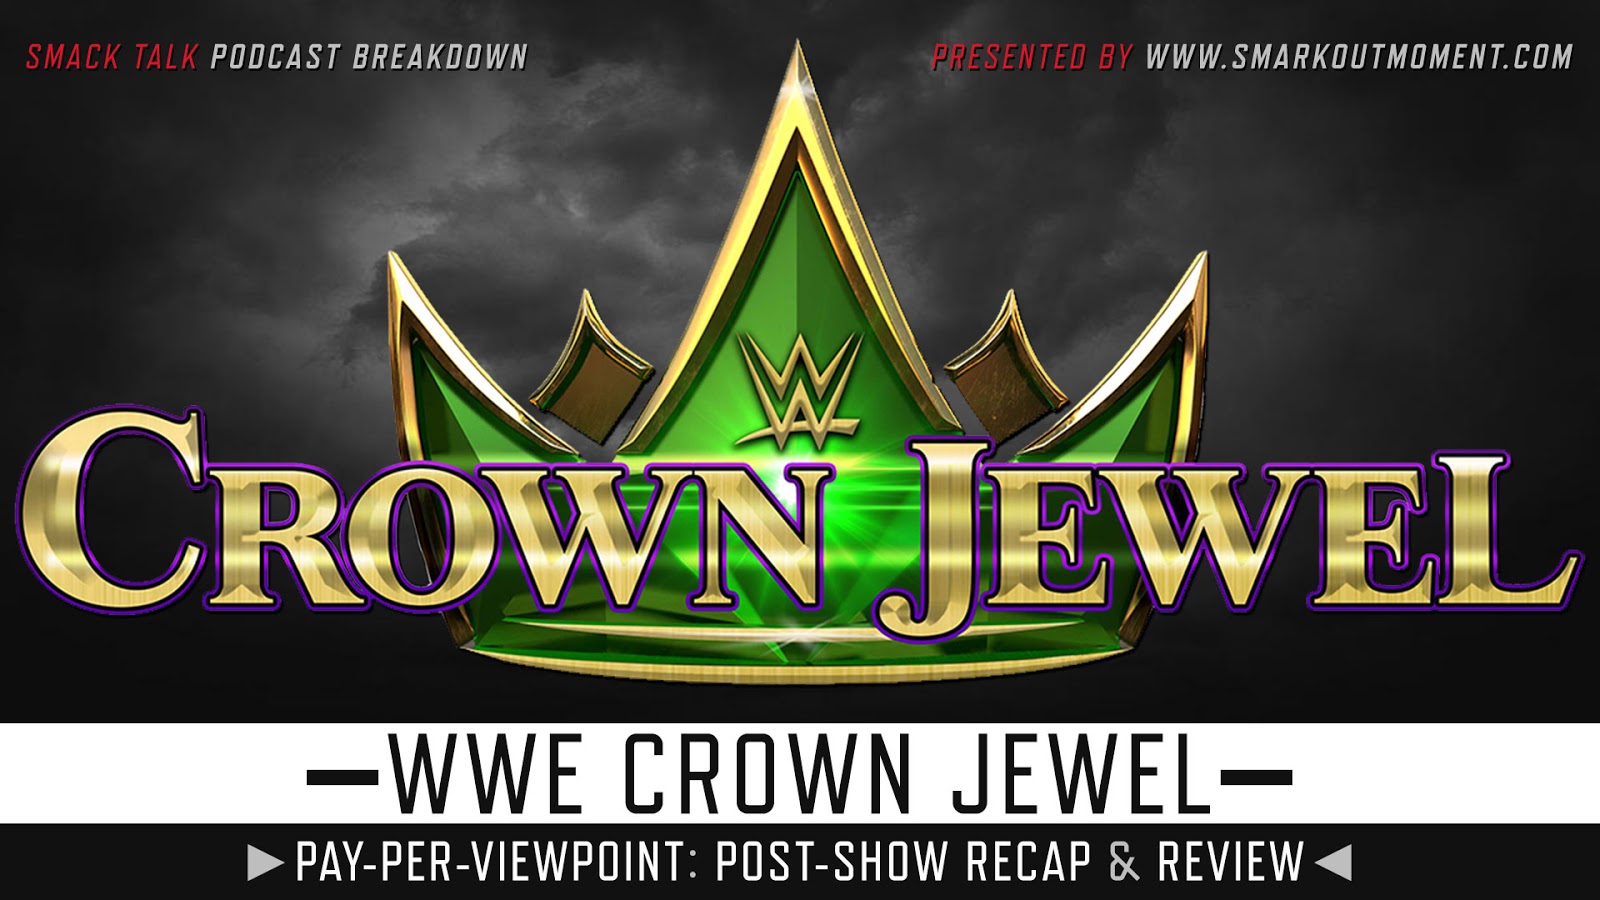 WWE Crown Jewel 2021 Recap and Review Podcast